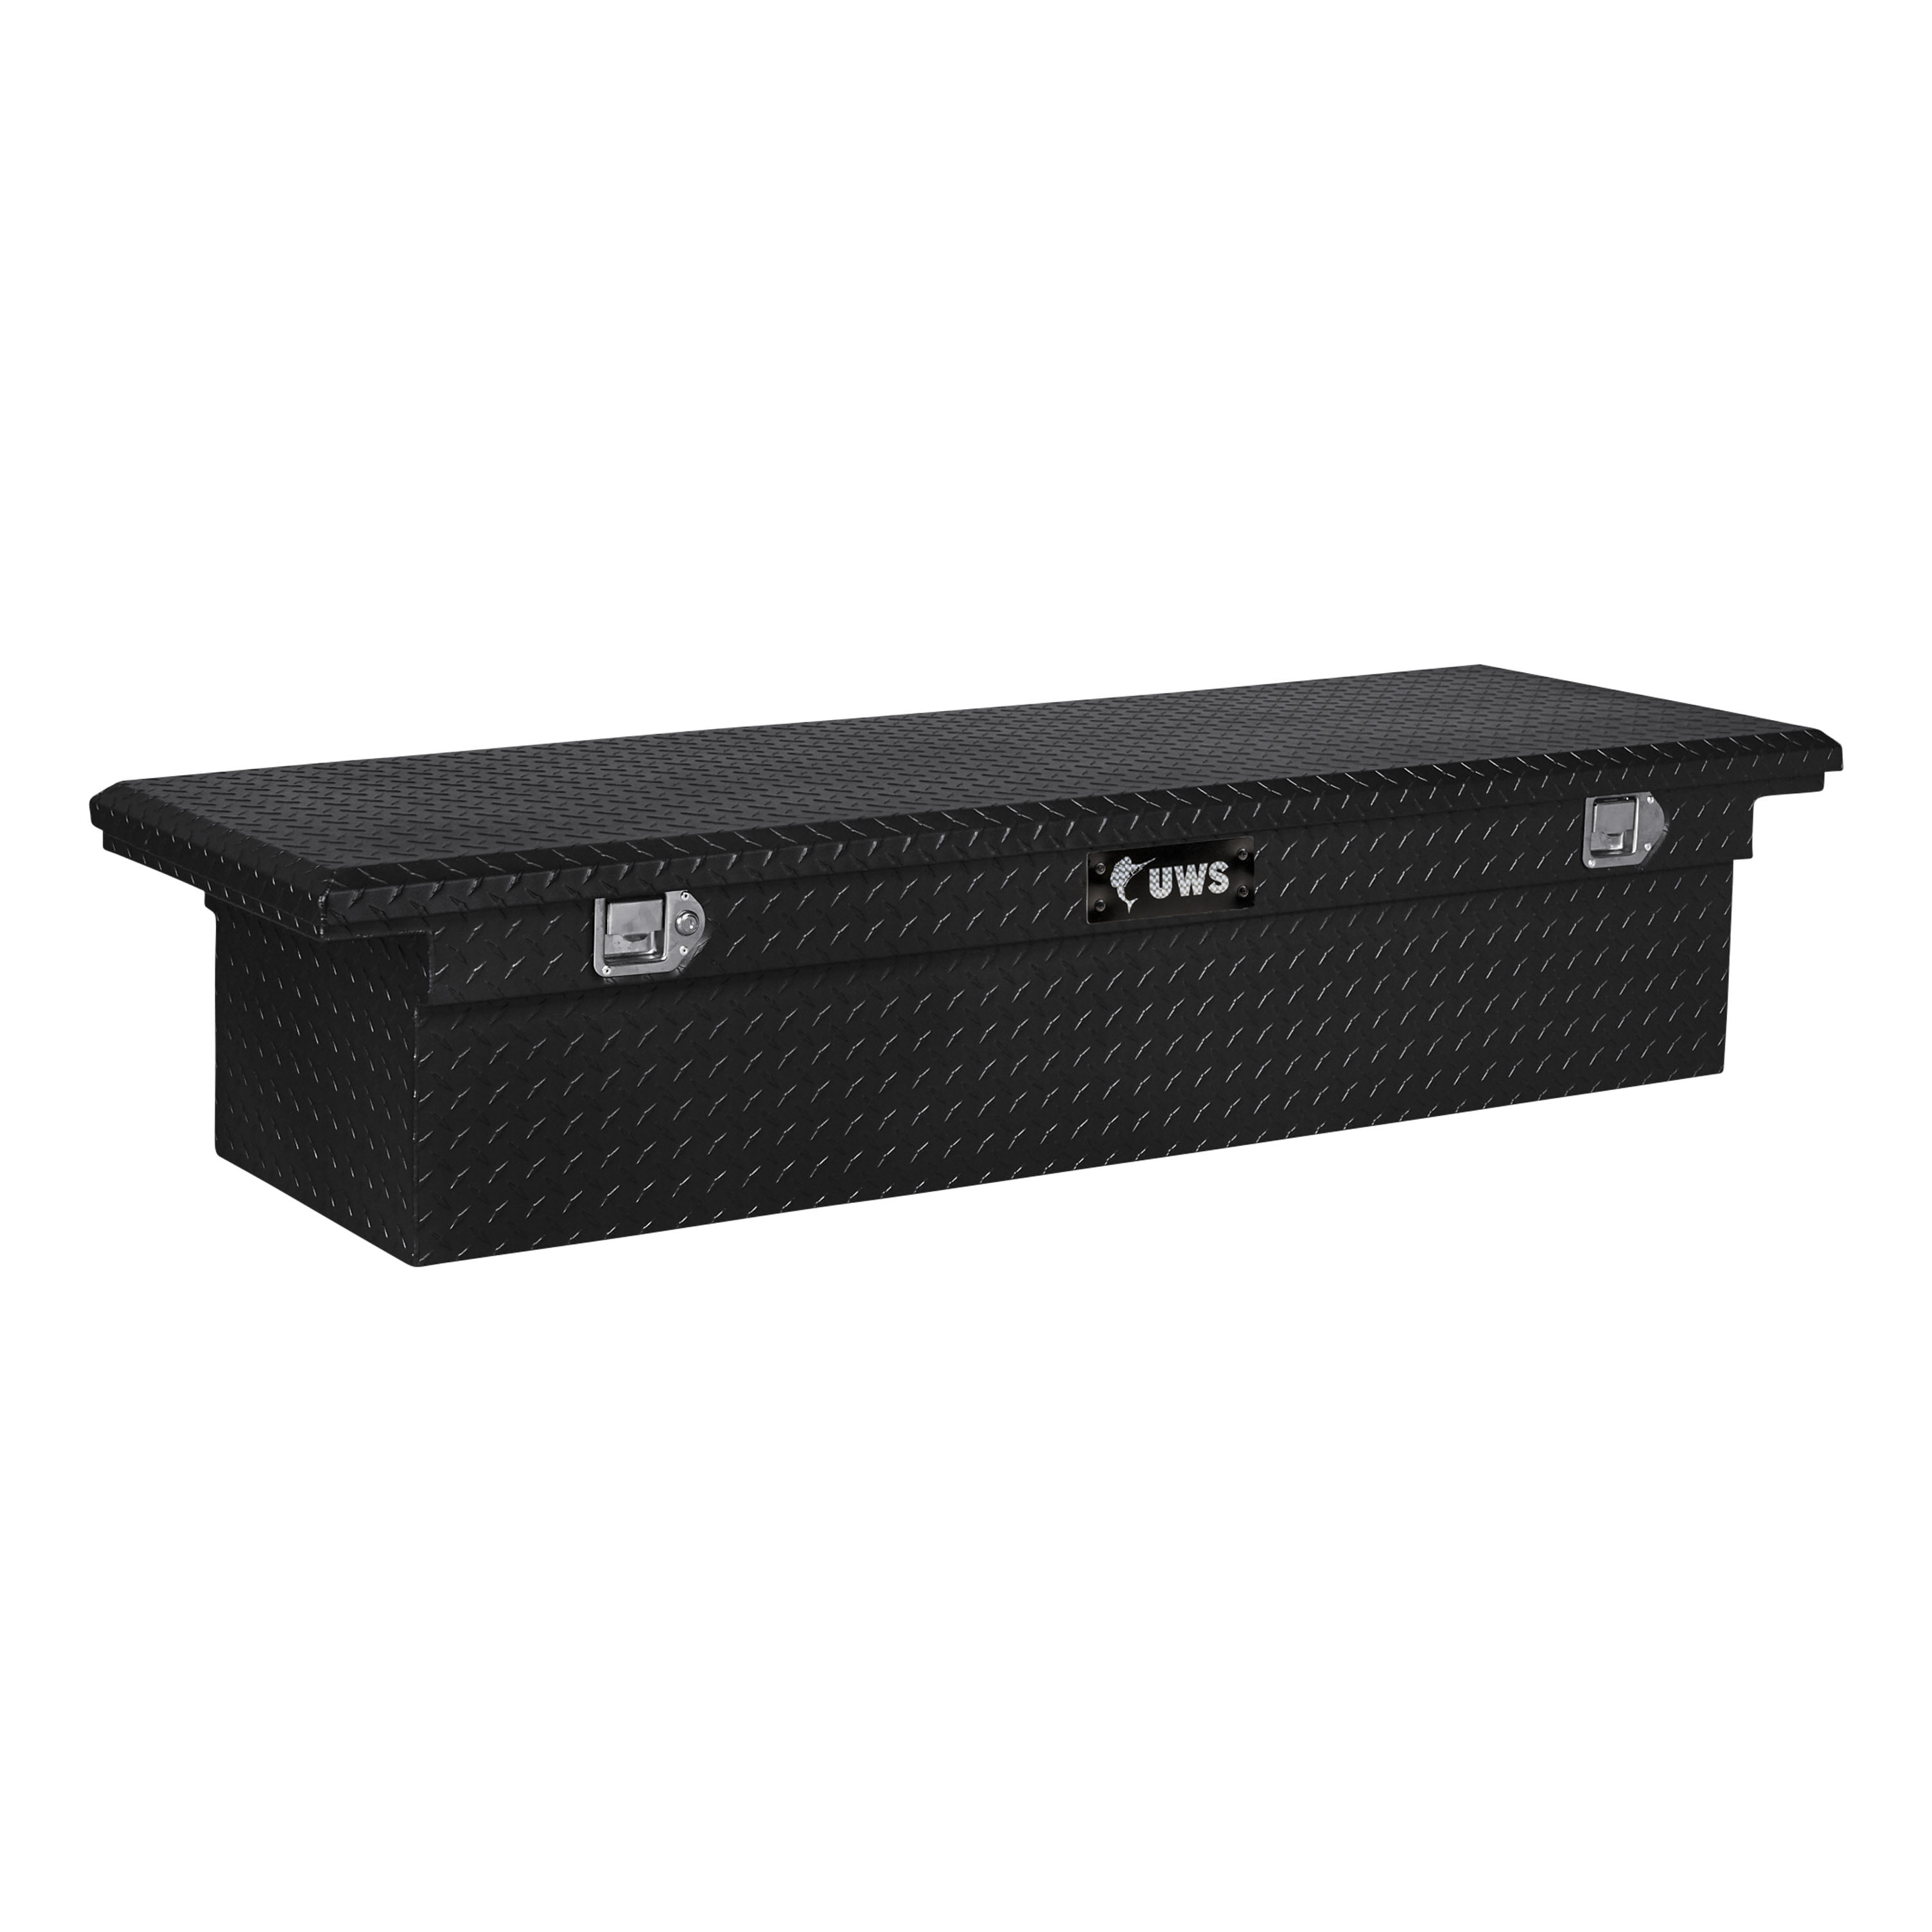 UWS TBS-63-A-LP-MB 63-Inch Matte Black Aluminum Angled Truck Tool Box with Low Profile 